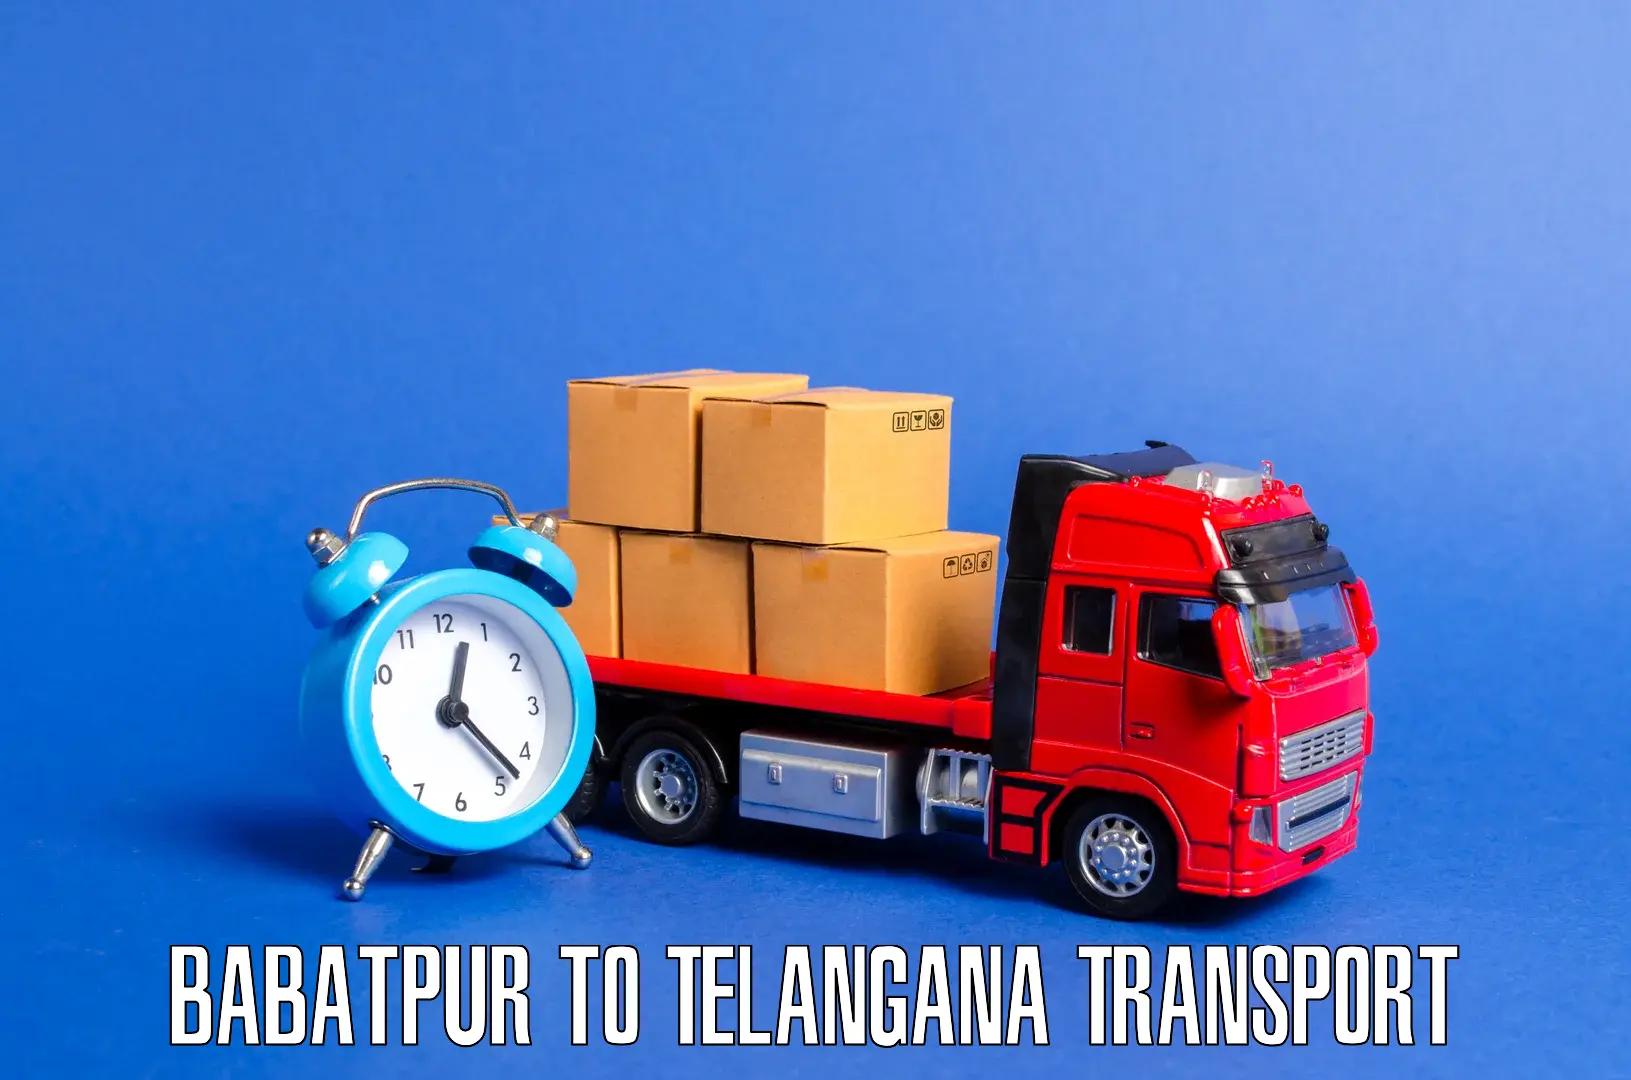 Transport bike from one state to another Babatpur to Kakeshwaram